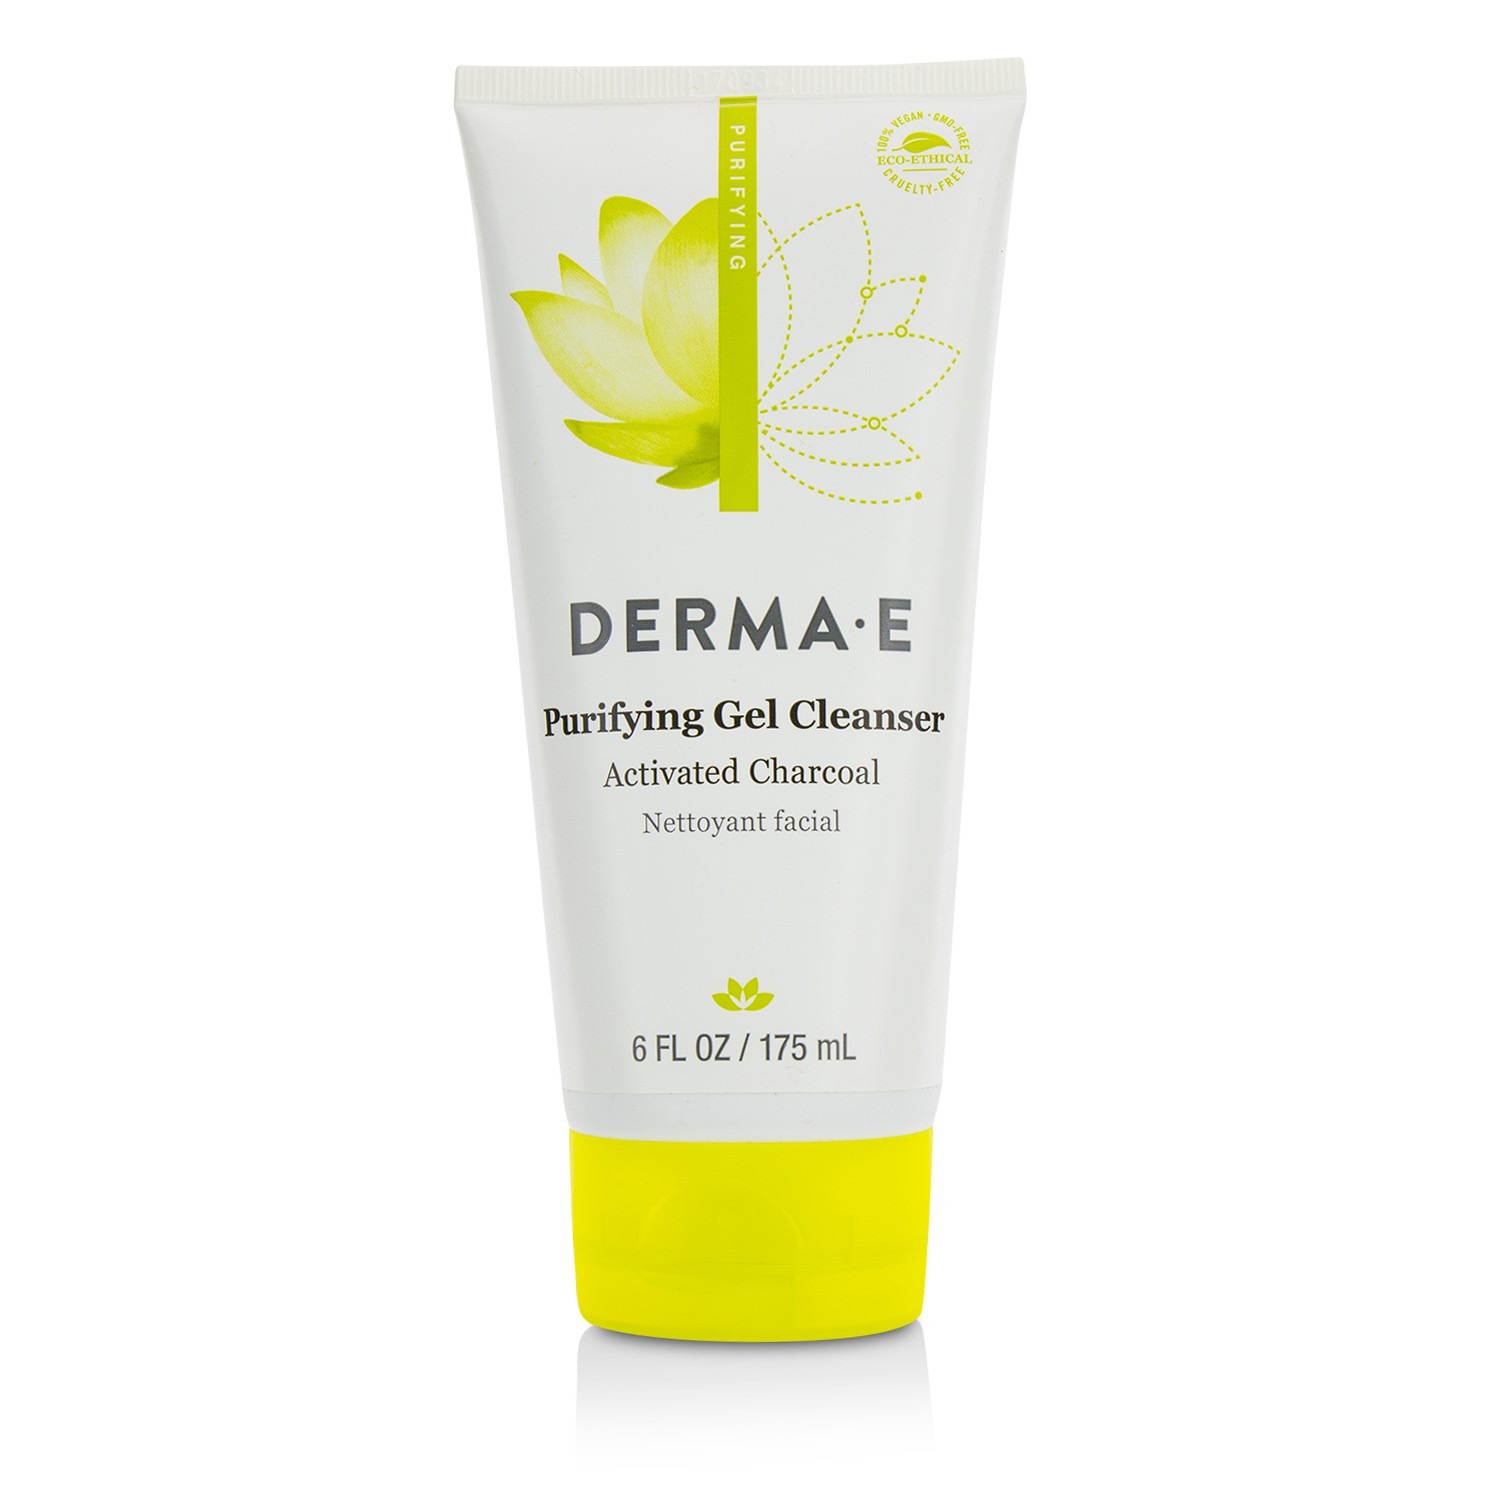 Purifying Gel Cleanser Derma E Image